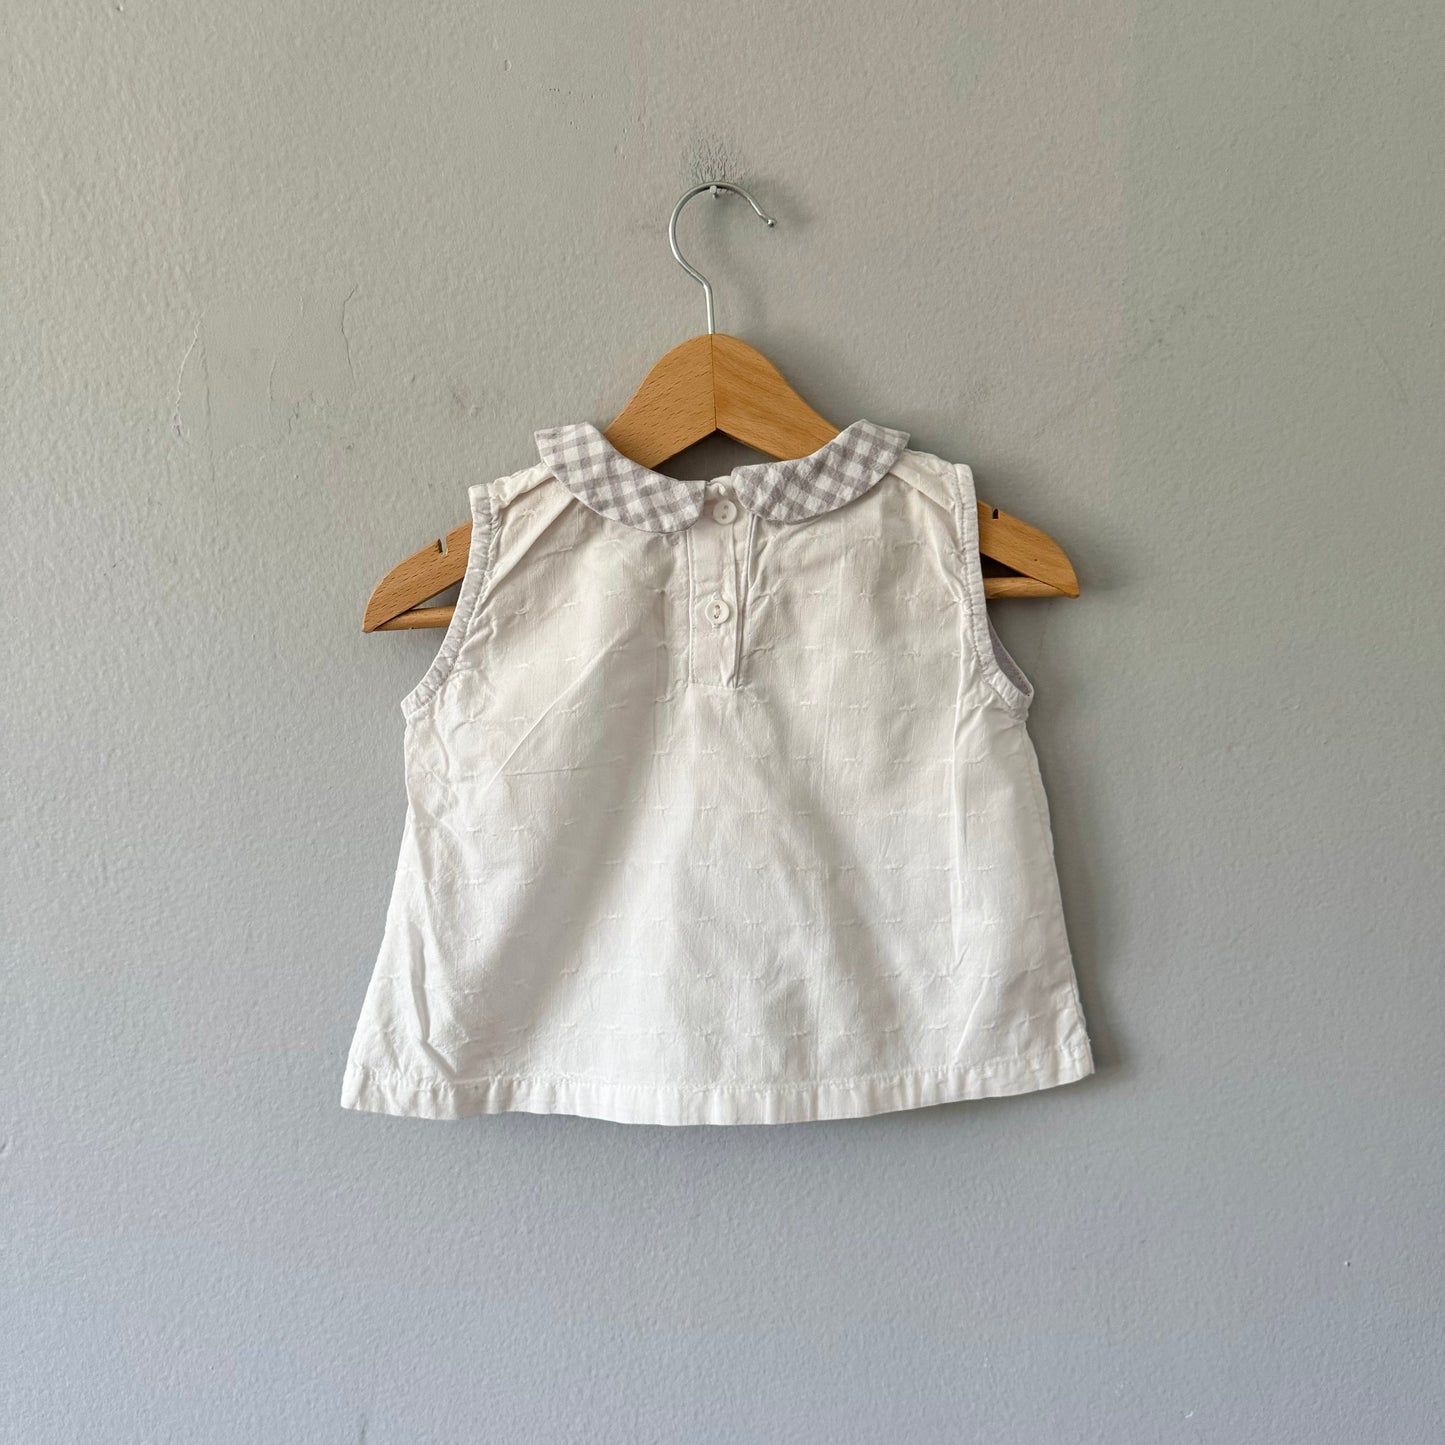 Rupert & Rosie. / White tank blouse with gingham collar / 18-24M